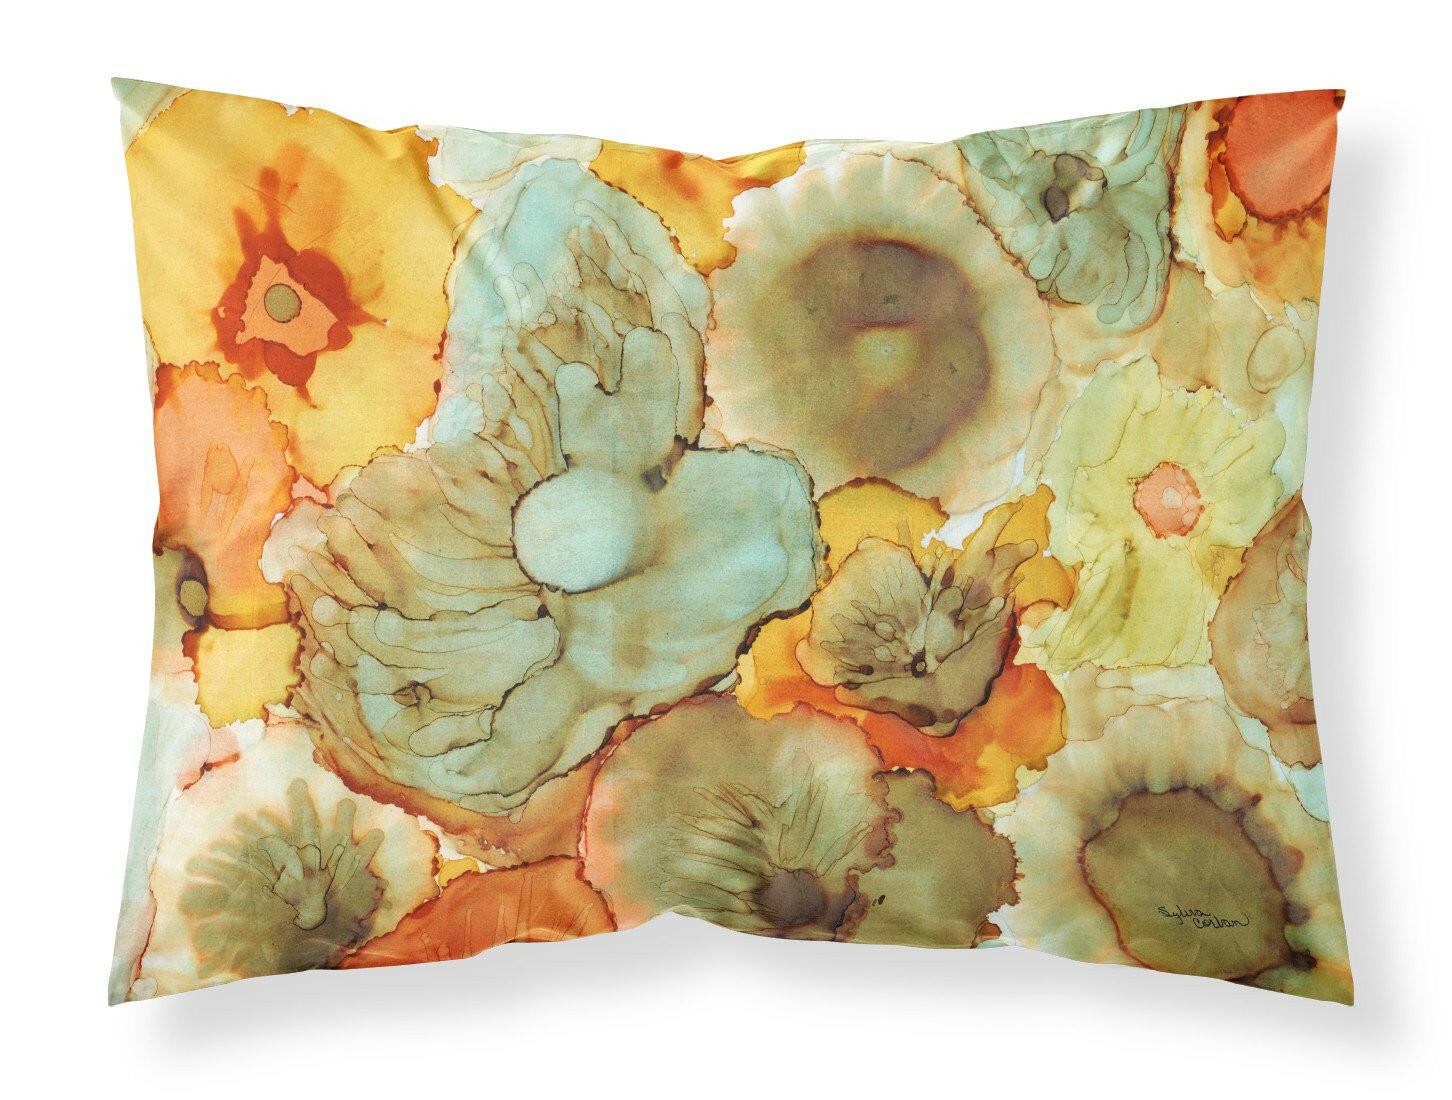 Abstract Flowers Teal and Orange Fabric Standard Pillowcase 8969PILLOWCASE by Caroline's Treasures